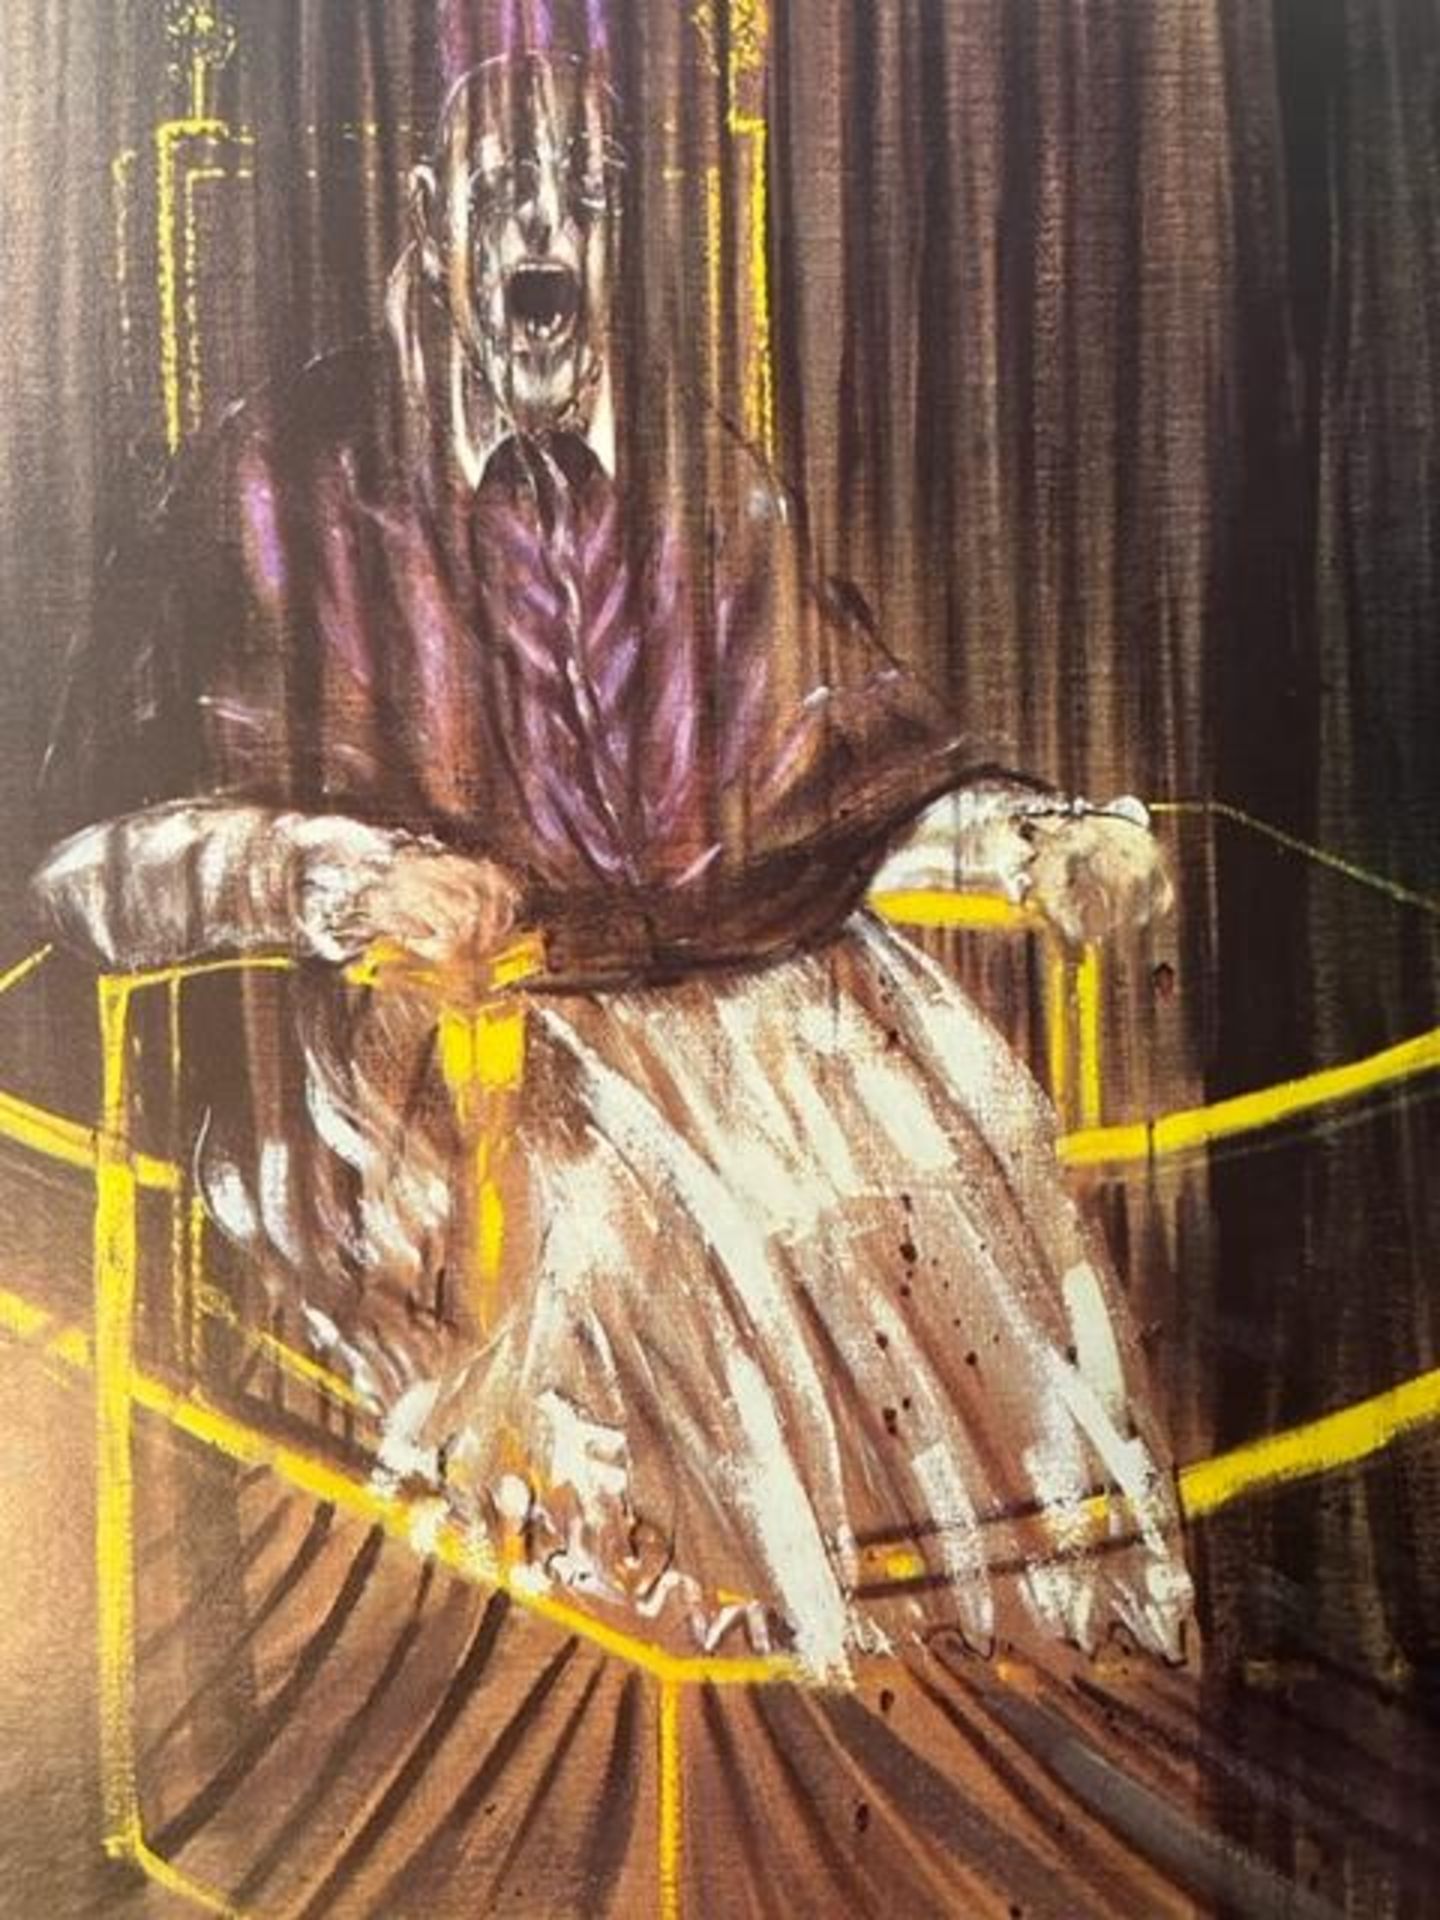 Francis Bacon "Study after Velazques's Portrait of Pope Innocent X" Print. - Image 4 of 6